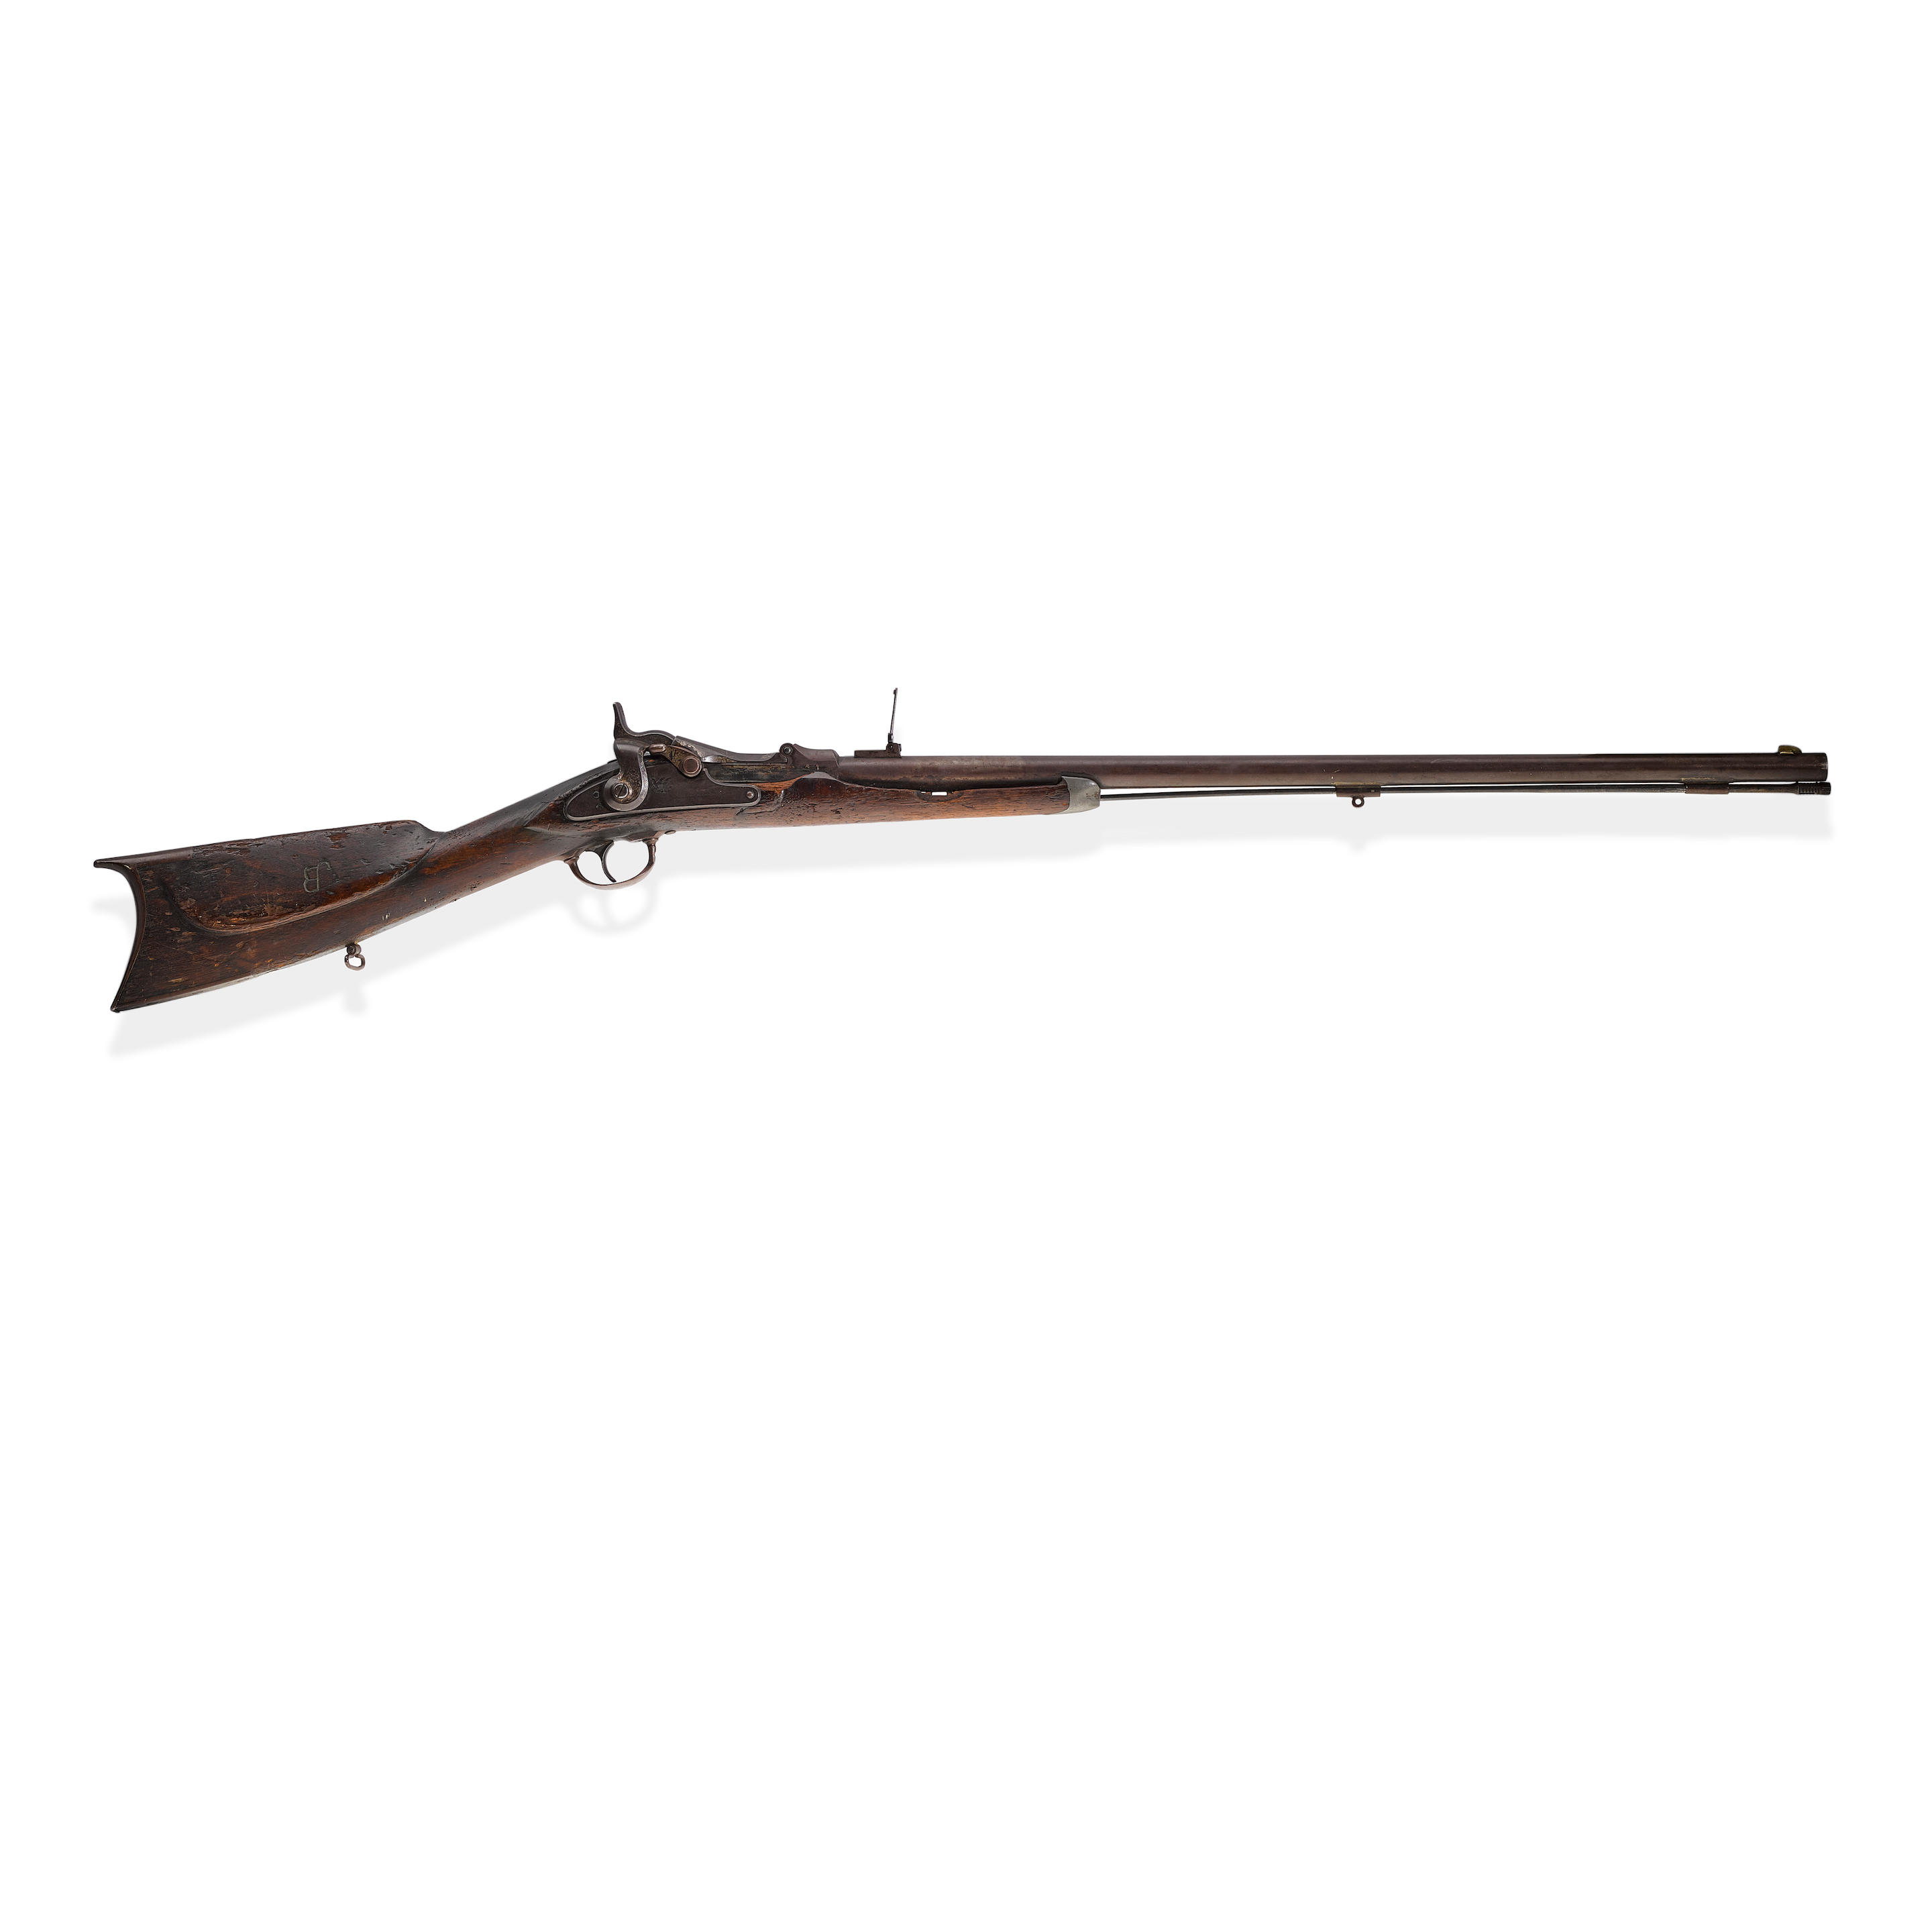 WILD BILL HICKOK'S SPRINGFIELD TRAPDOOR RIFLE BURIED BY HIS SIDE AT...